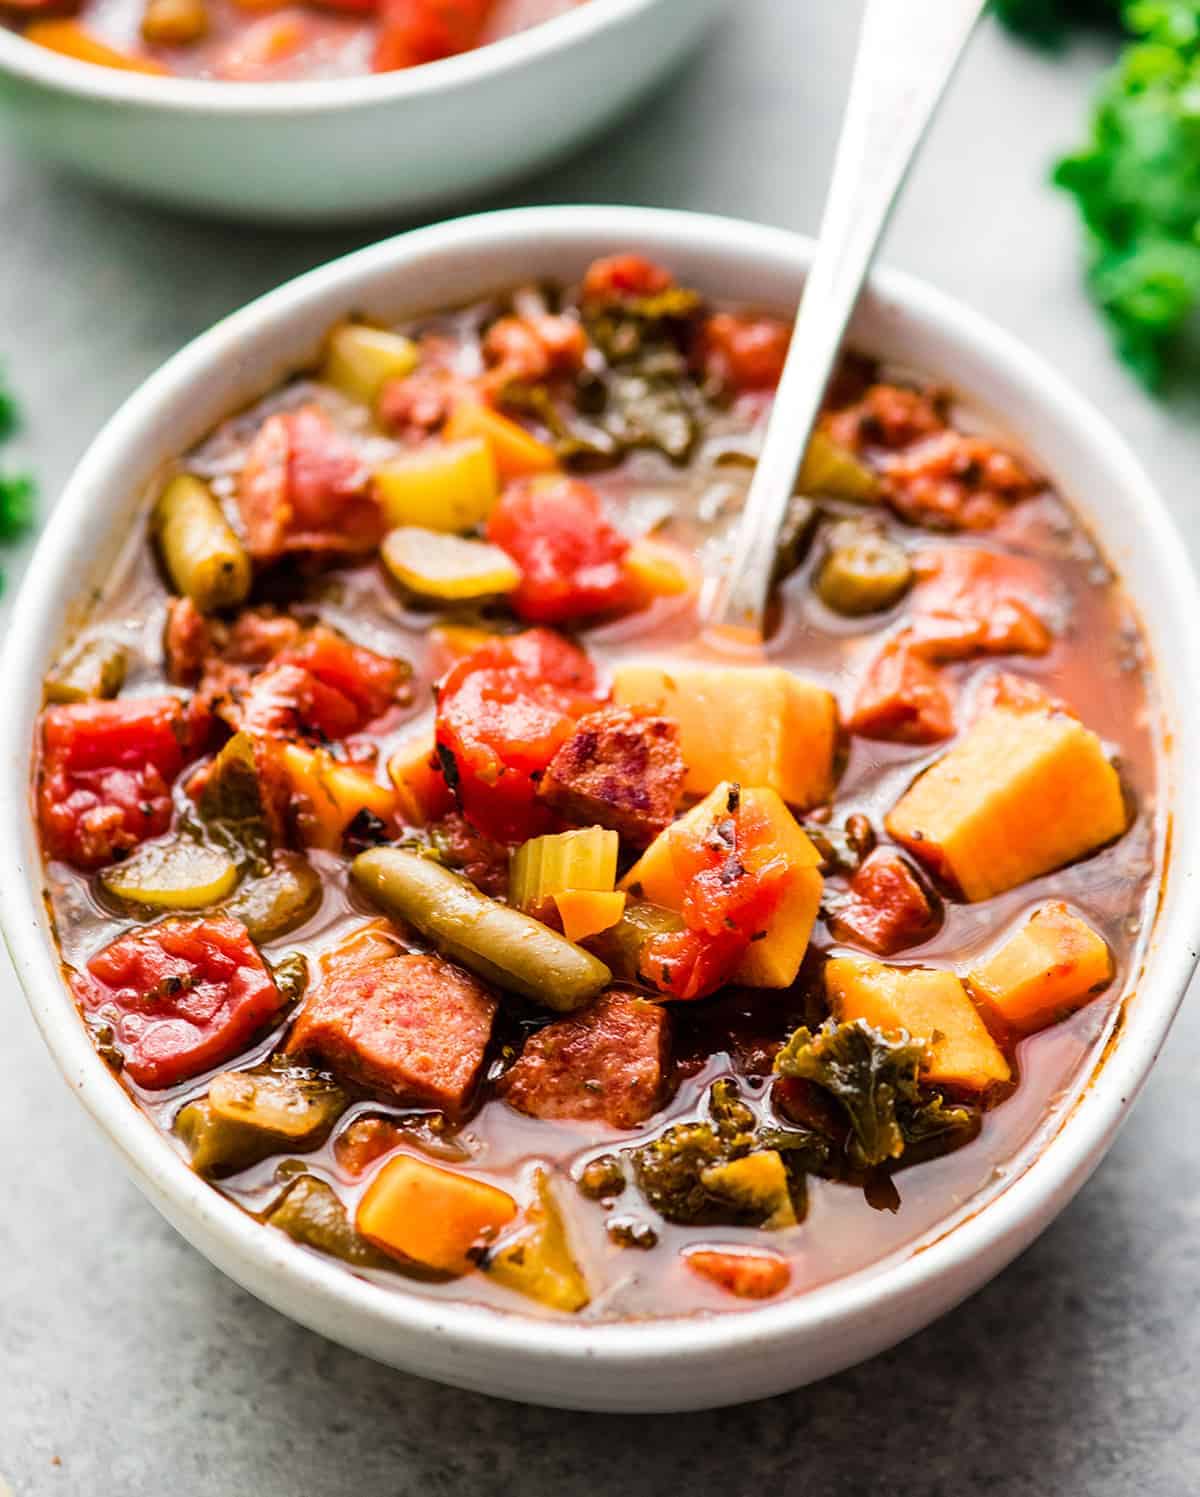 A flavorful bowl of stew made with sausage and a variety of vegetables.